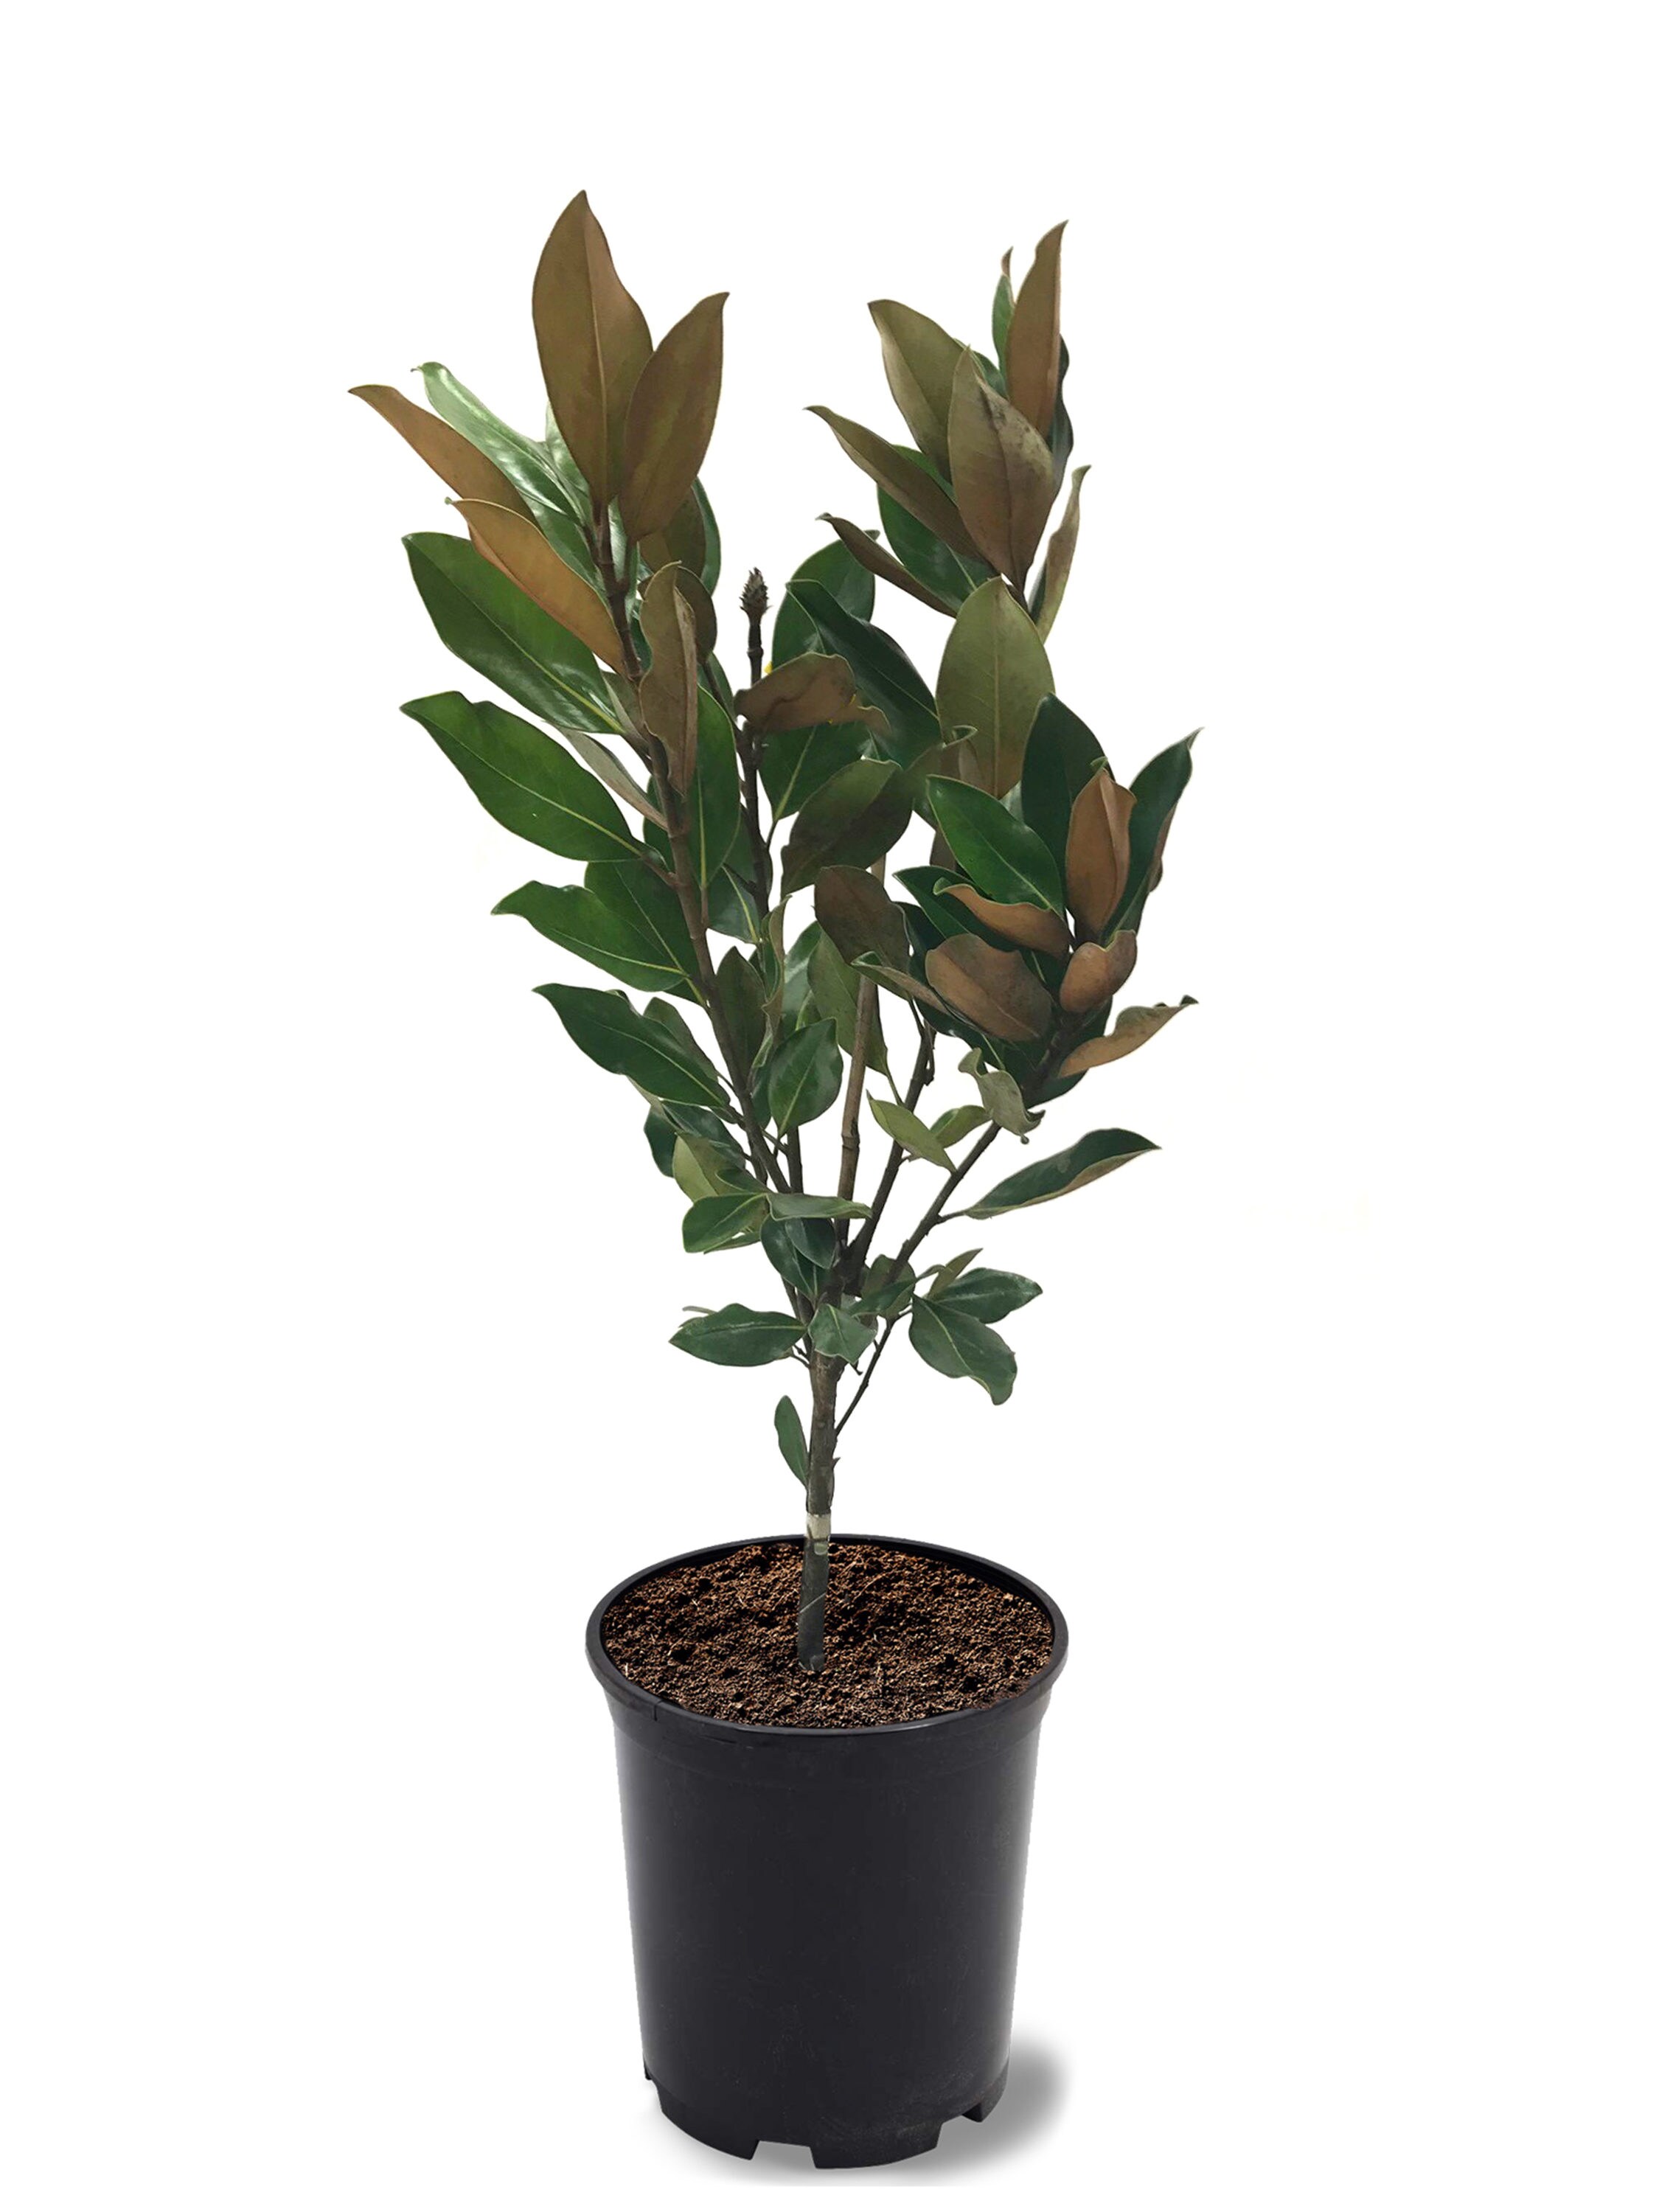 southern planters white flowering little gem magnolia tree in pot